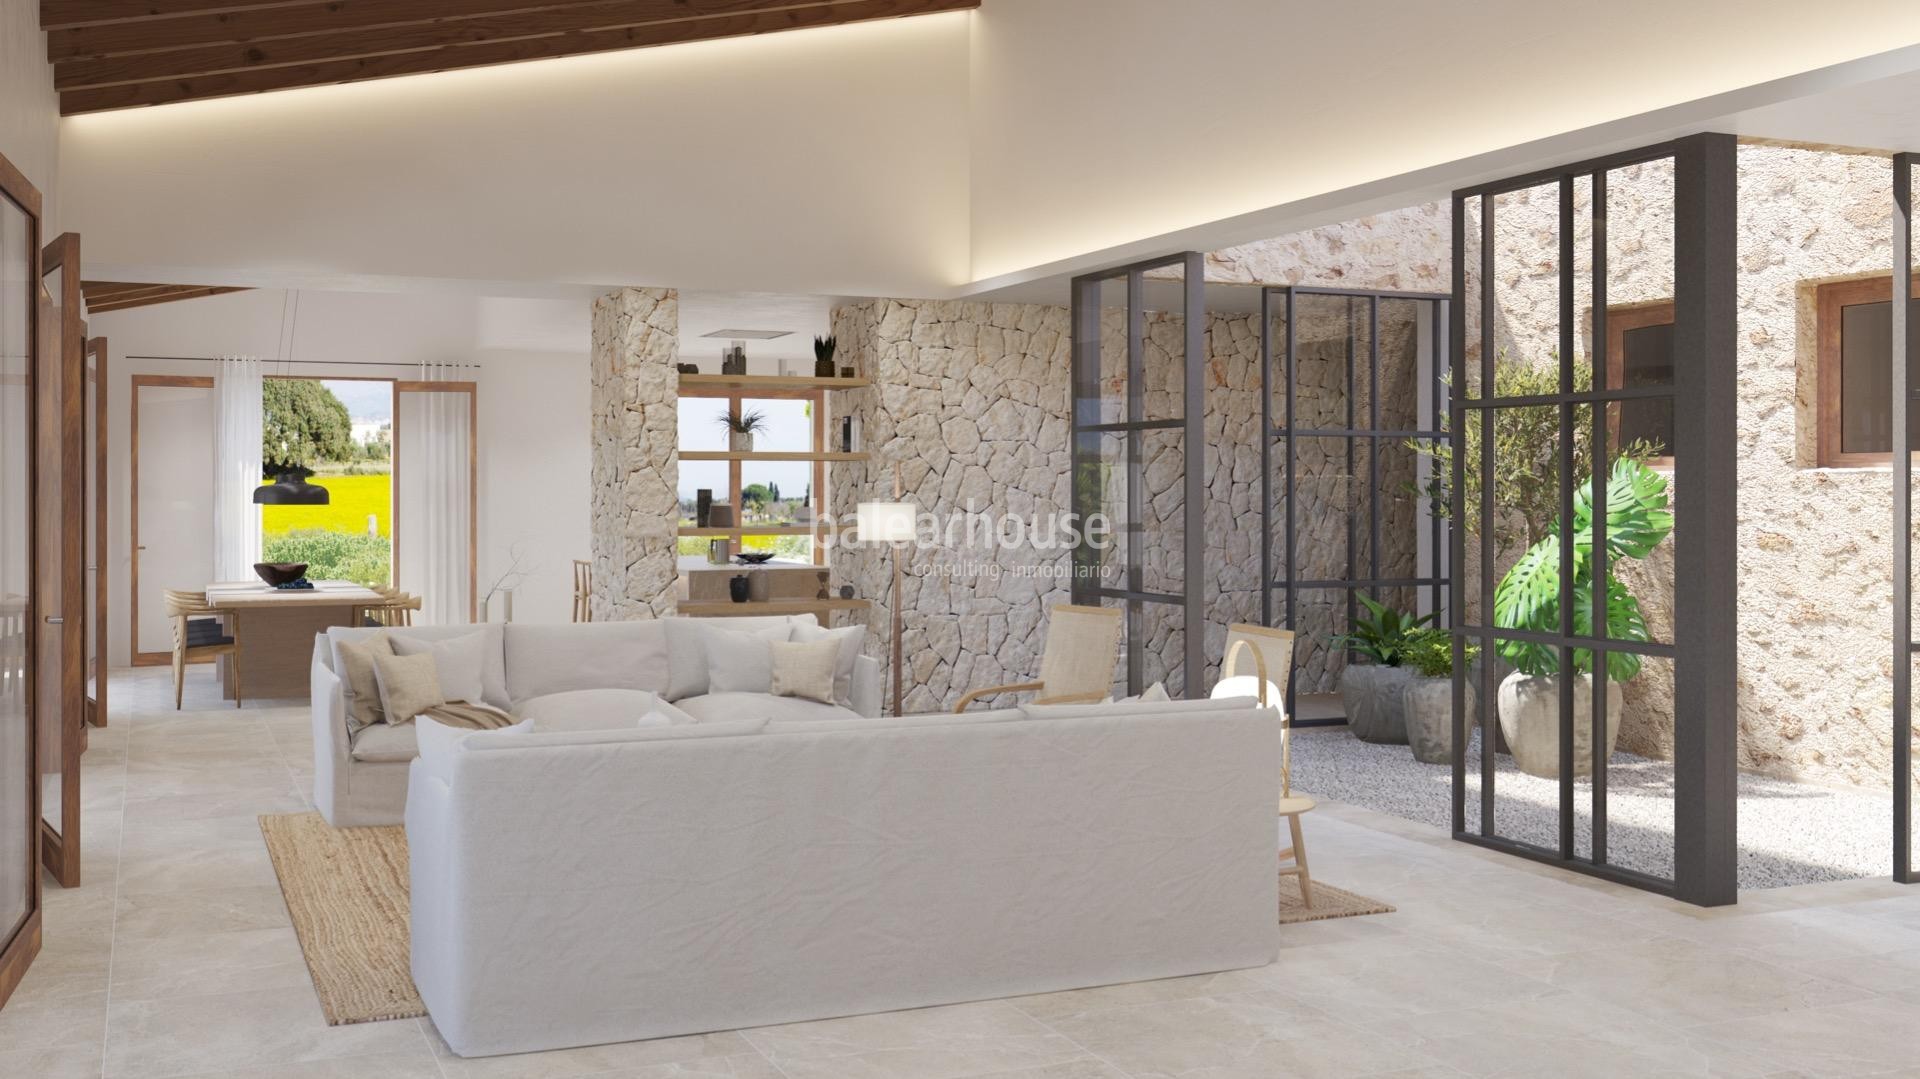 Magnificent newly built finca in a paradise among vineyards in the interior of Mallorca